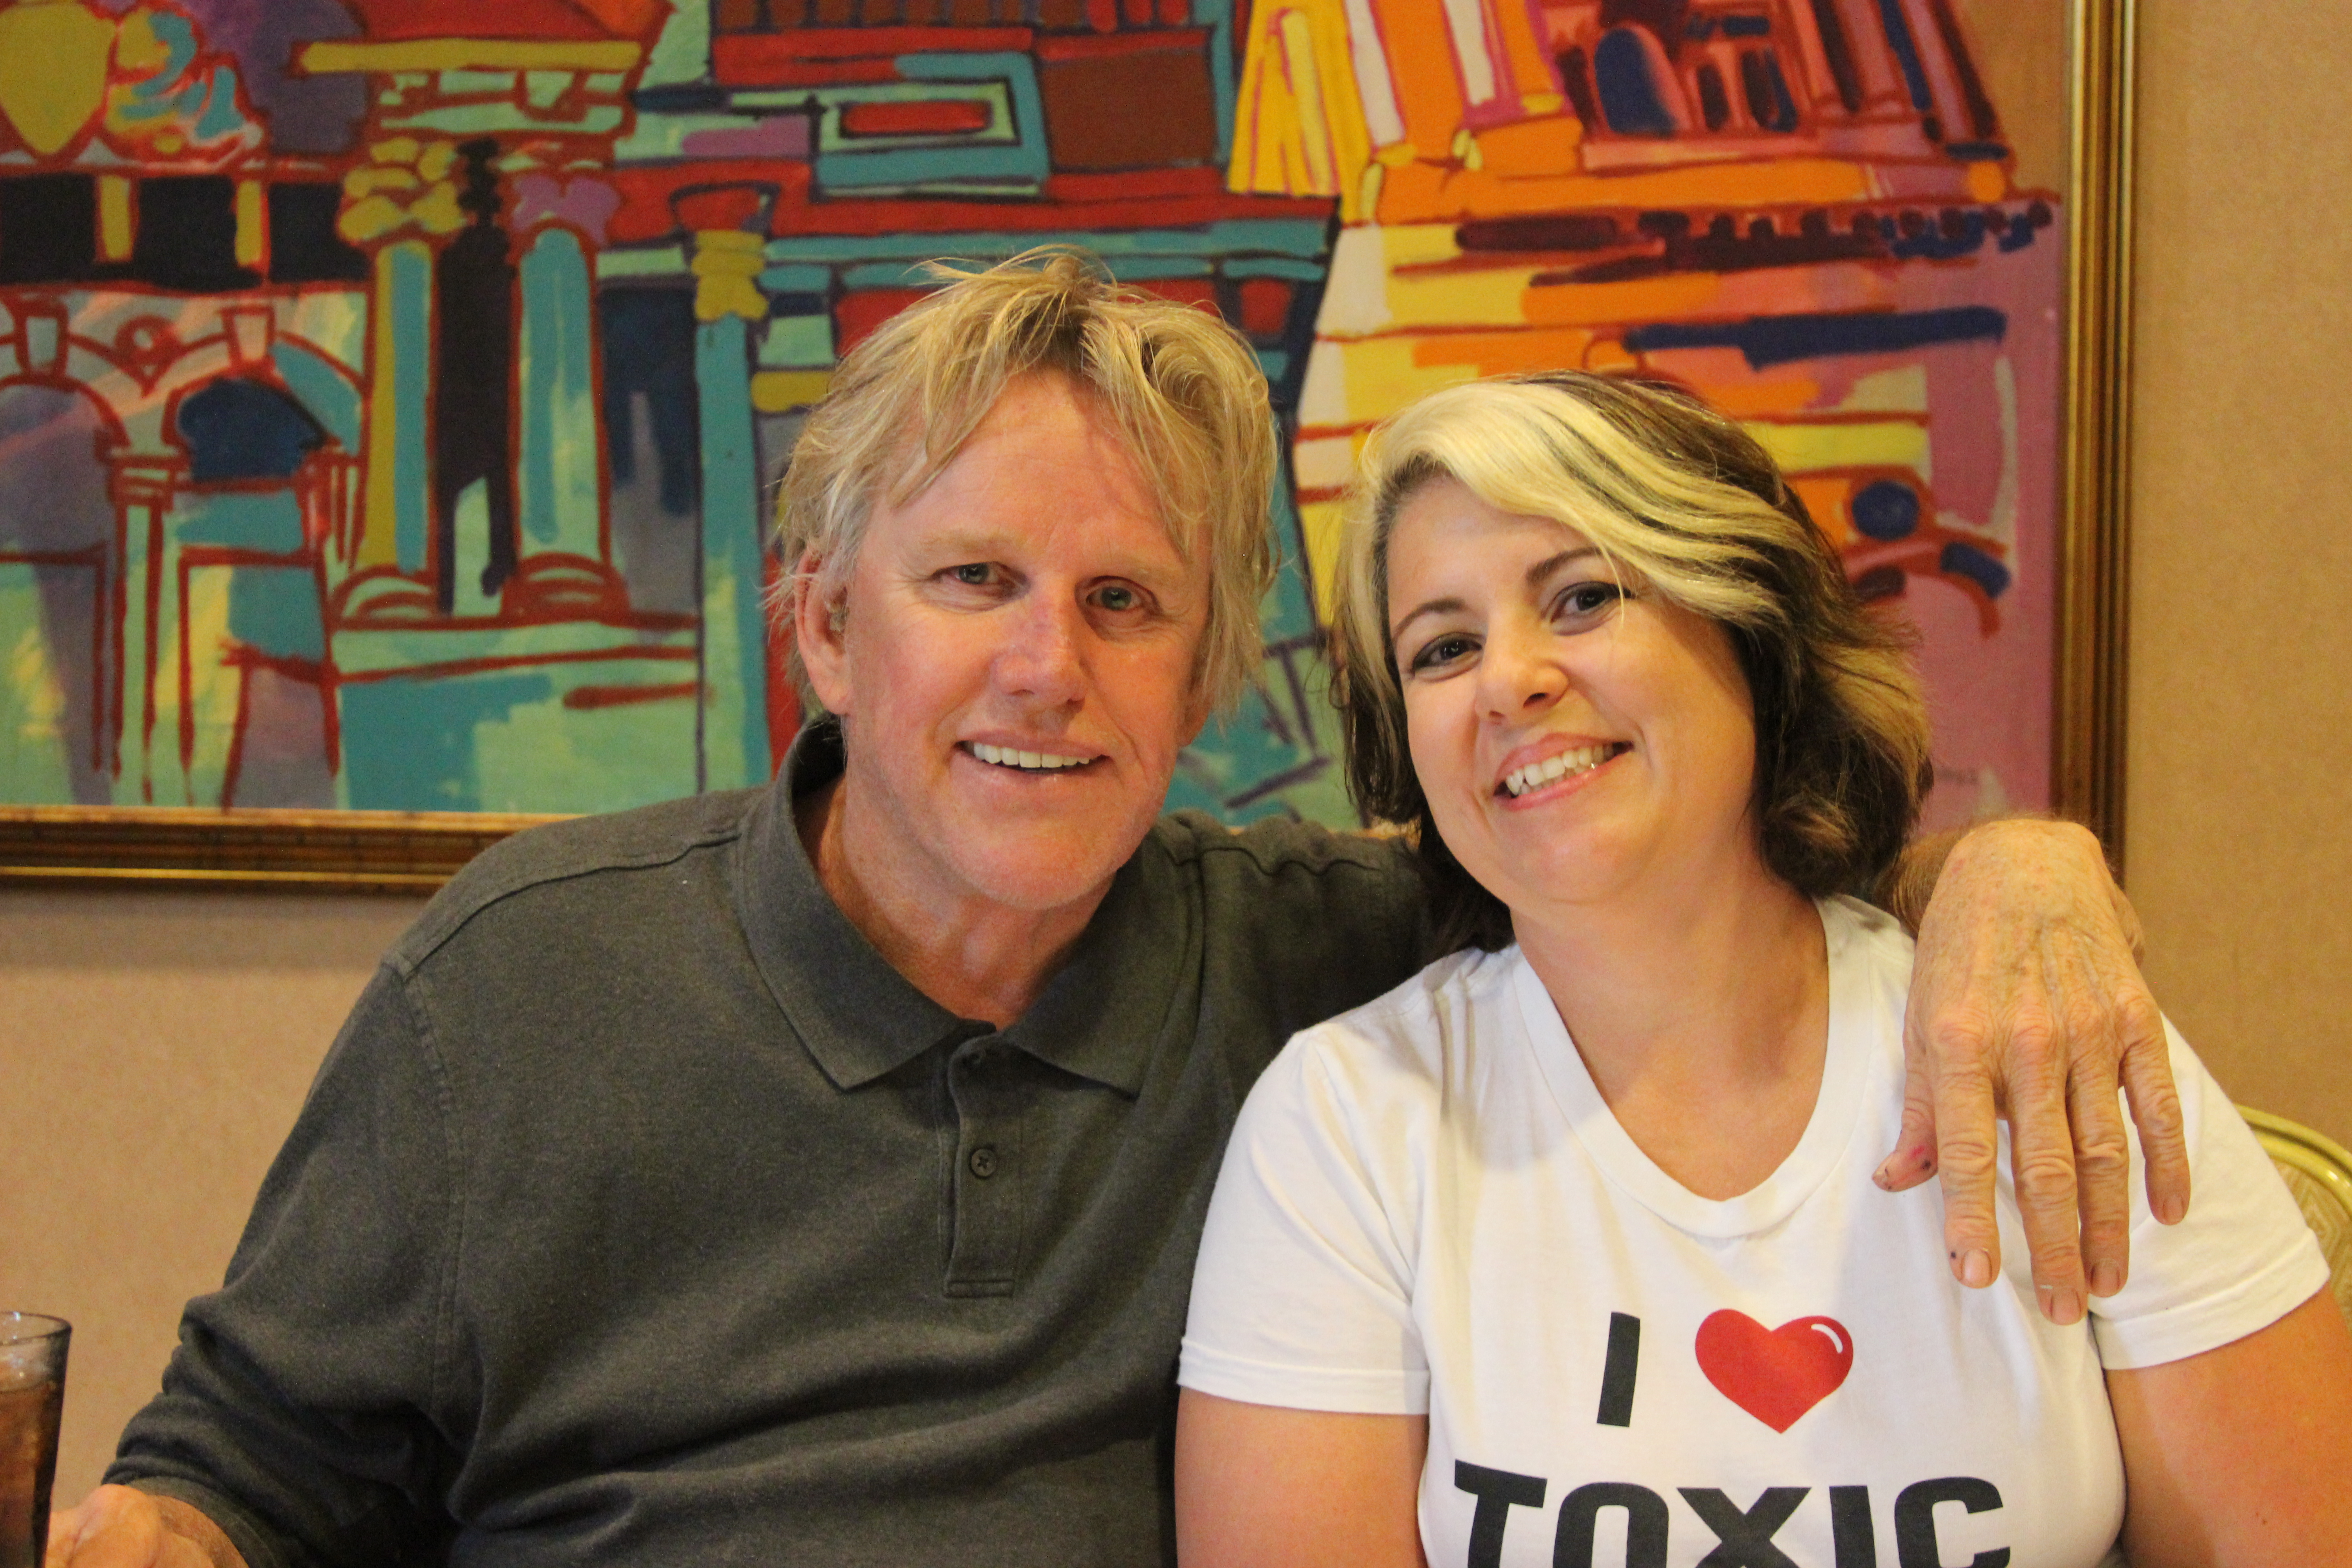 Point Break and Celebrity Apprentice star Busey poses with an adoring fan